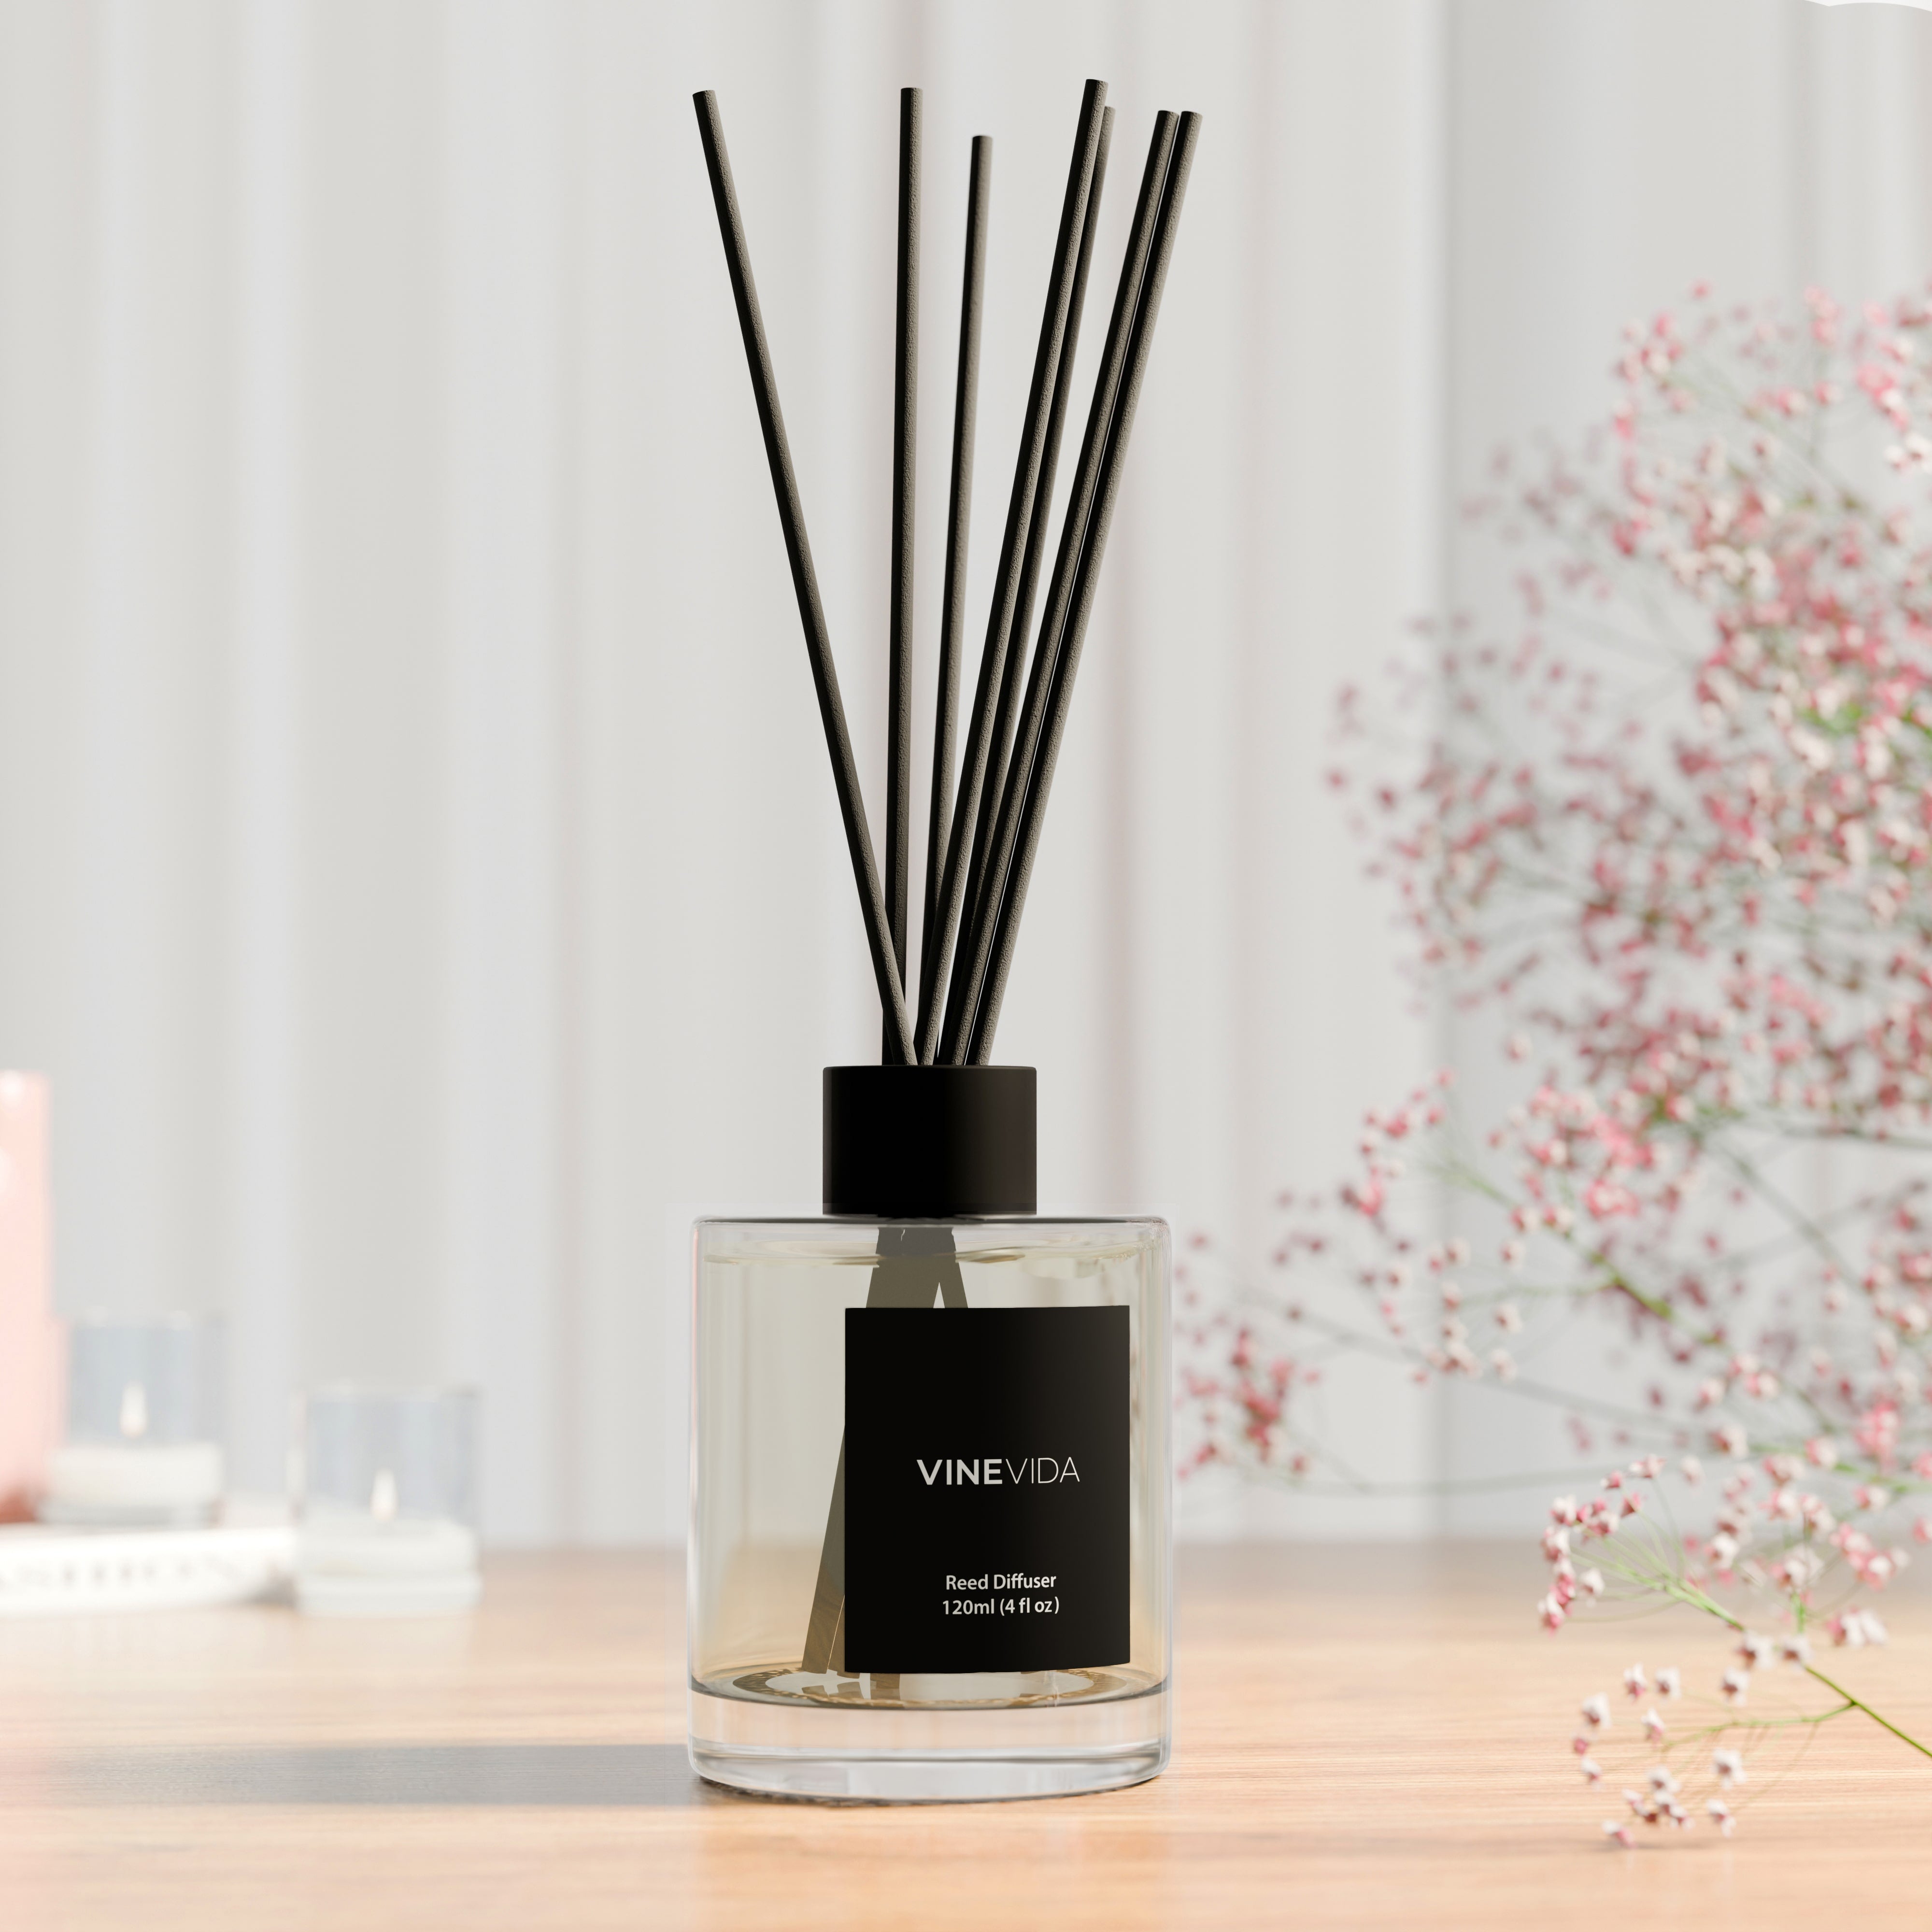 NO. 3200 Reed Diffuser - Inspired by: Le Male by Jean Paul Gaultier